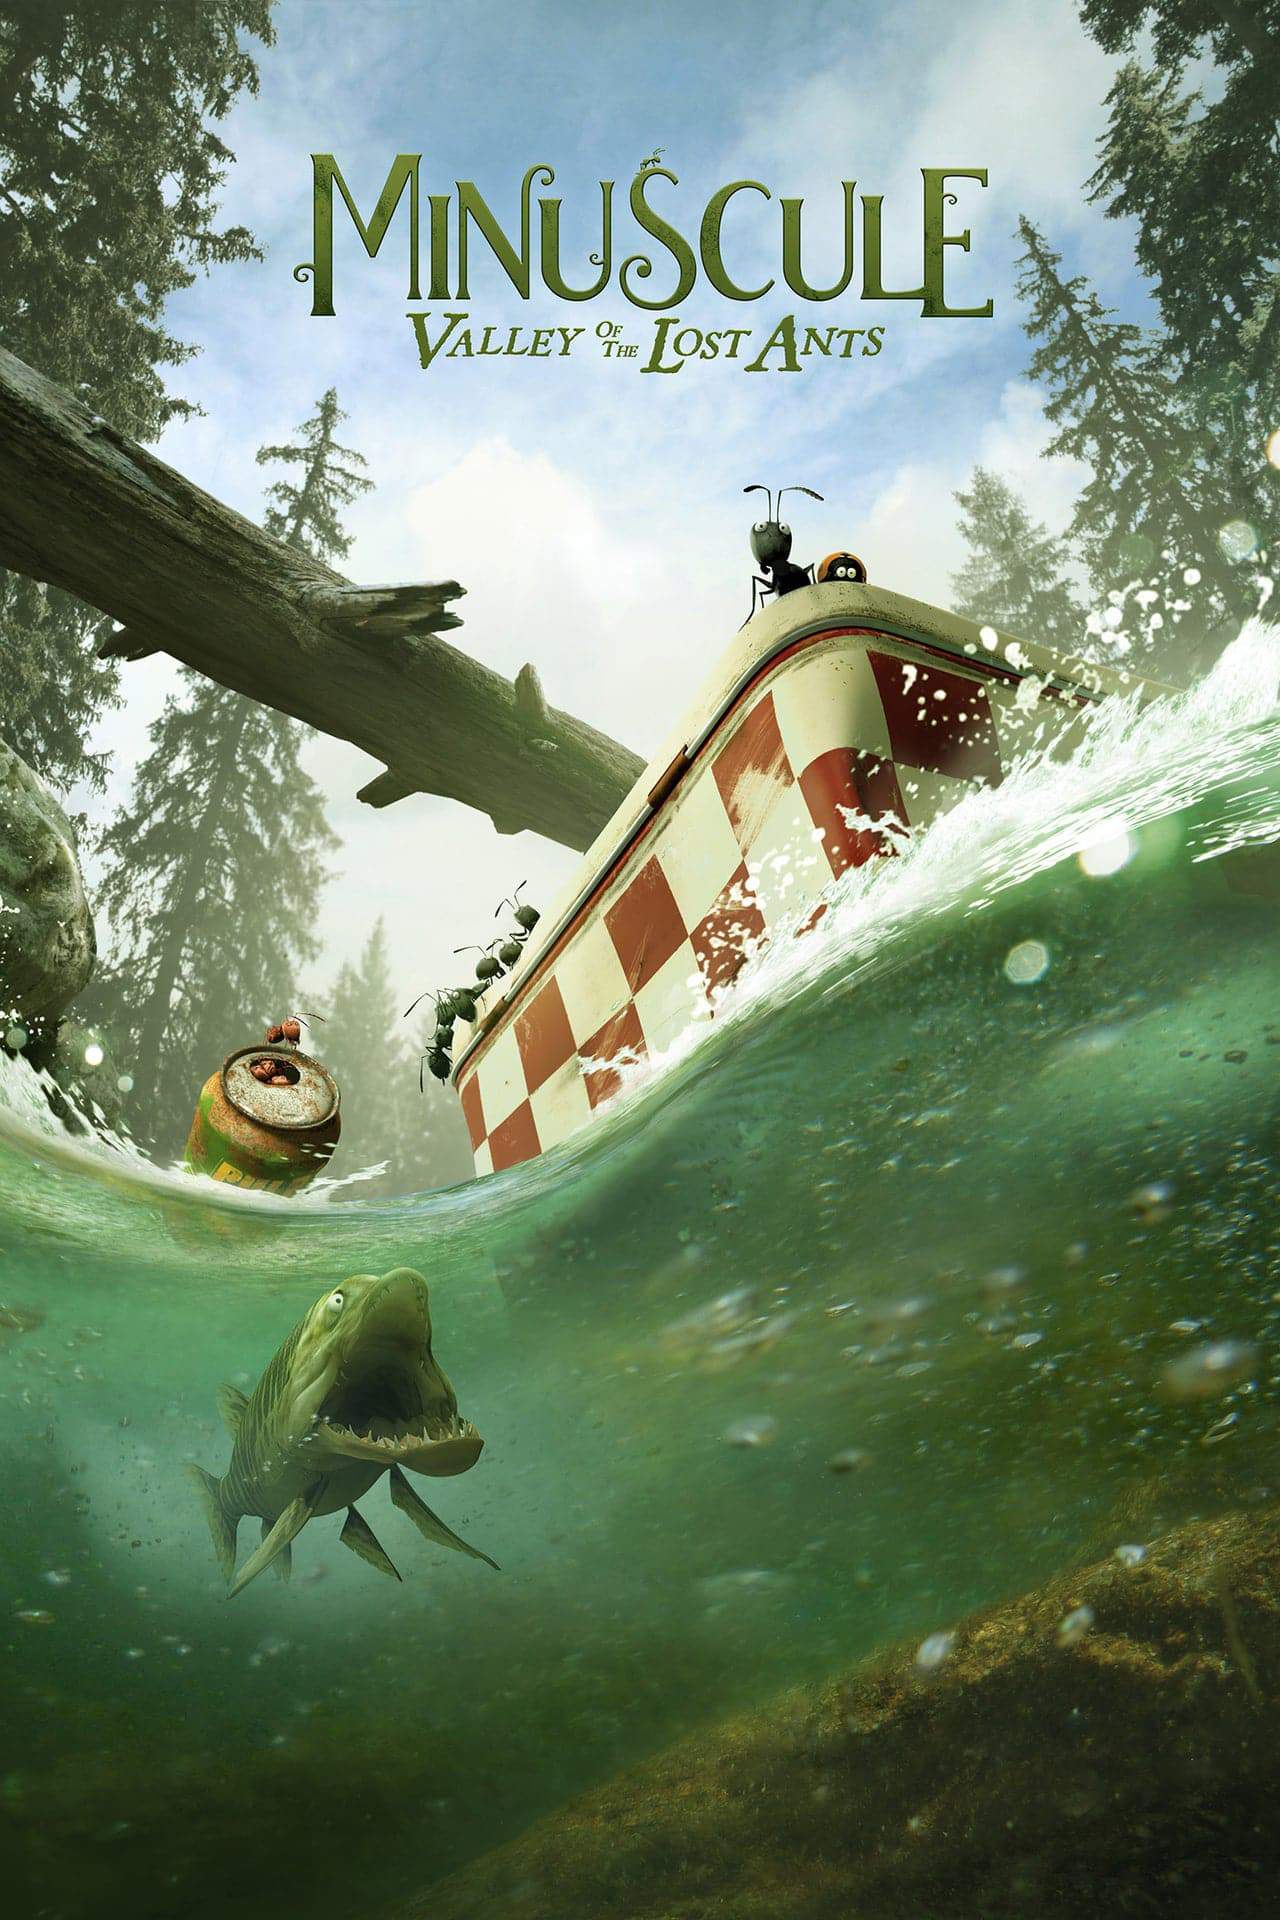 Minuscule Valley of the Lost Ants 2013 movie poster